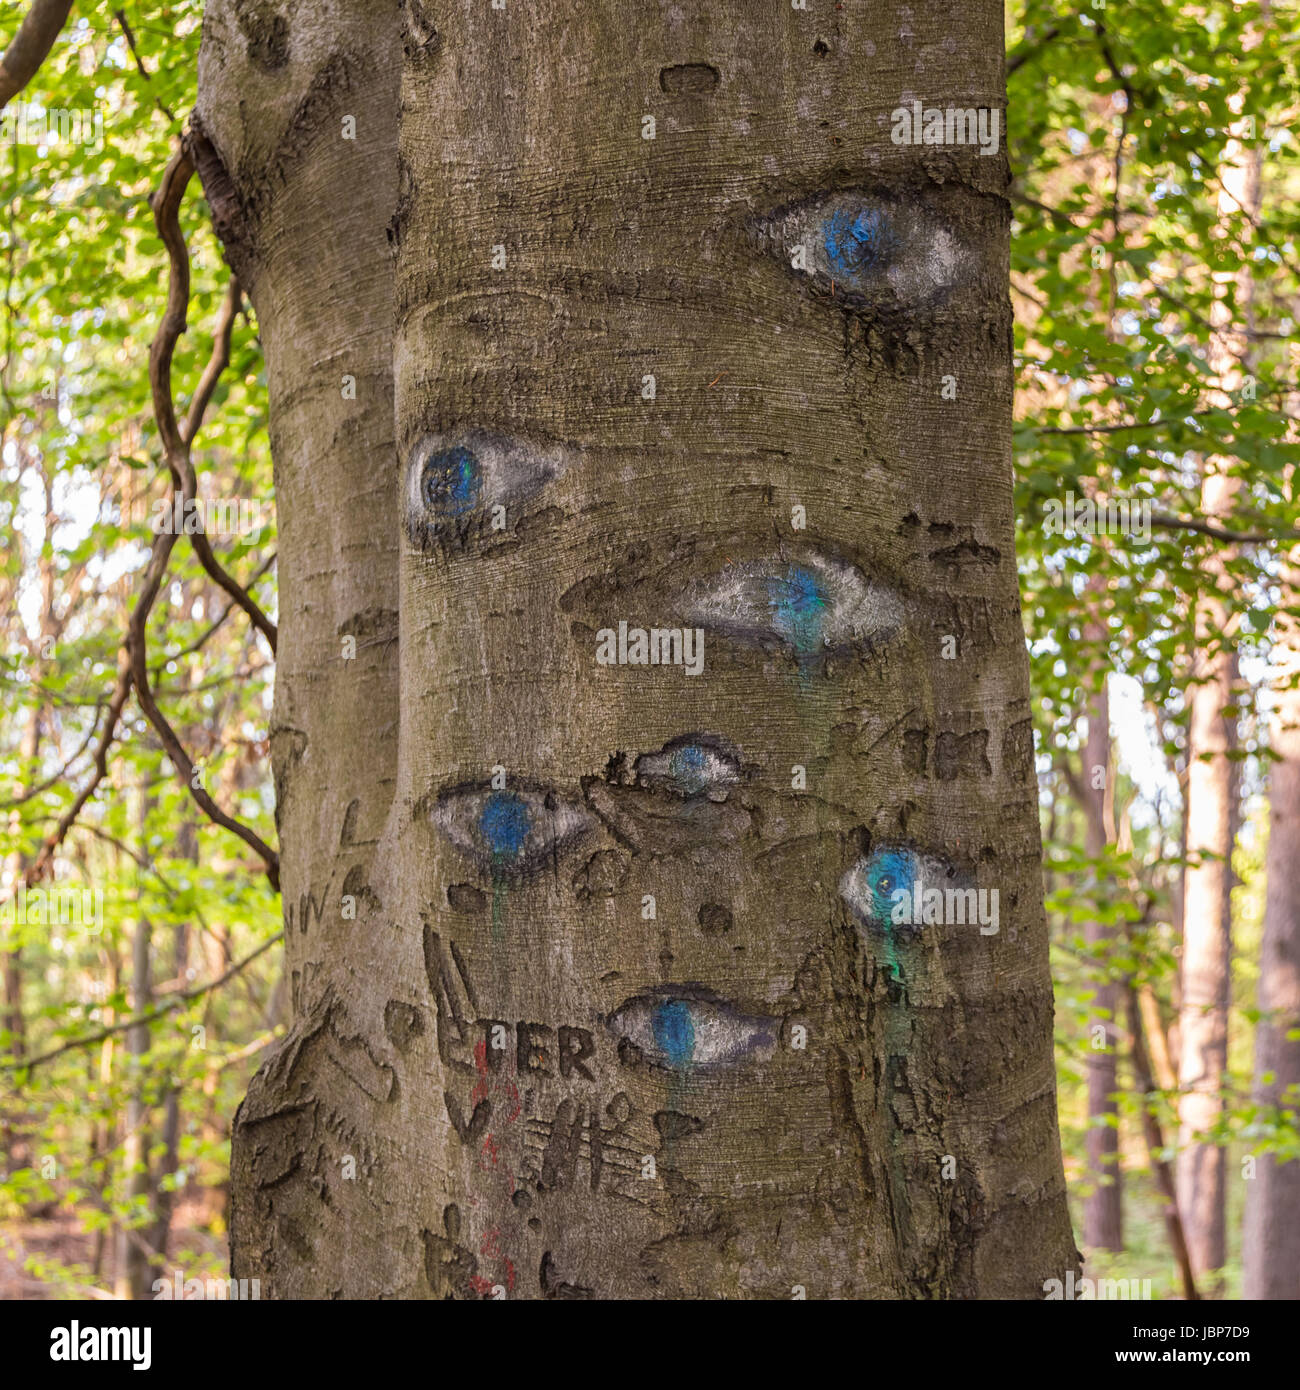 Eyes carved in tree trunk in lush green forest Stock Photo - Alamy